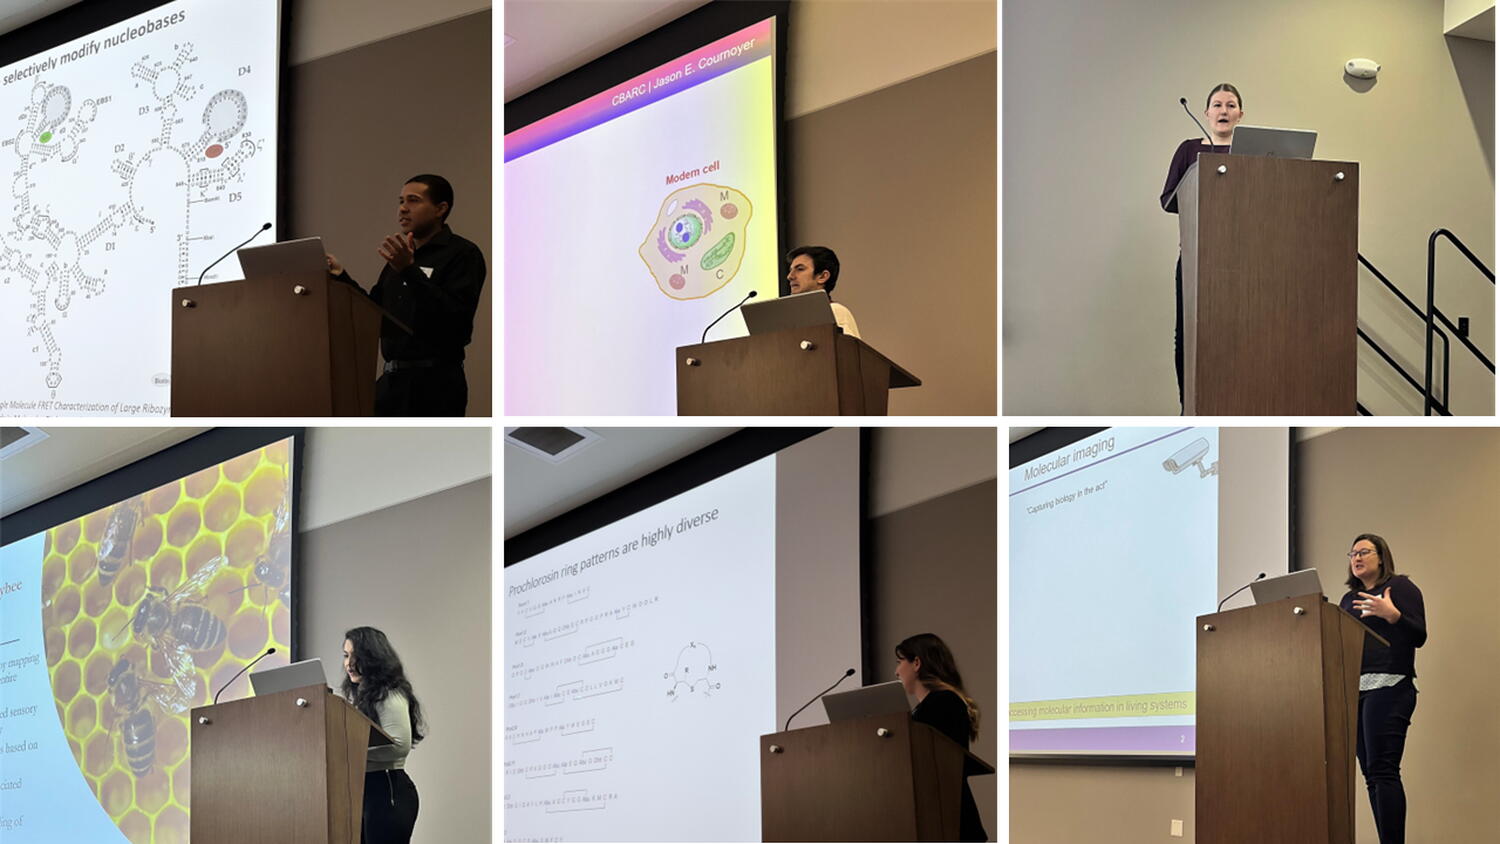 Six photos showing speakers at the podium presenting their research on a large screen.